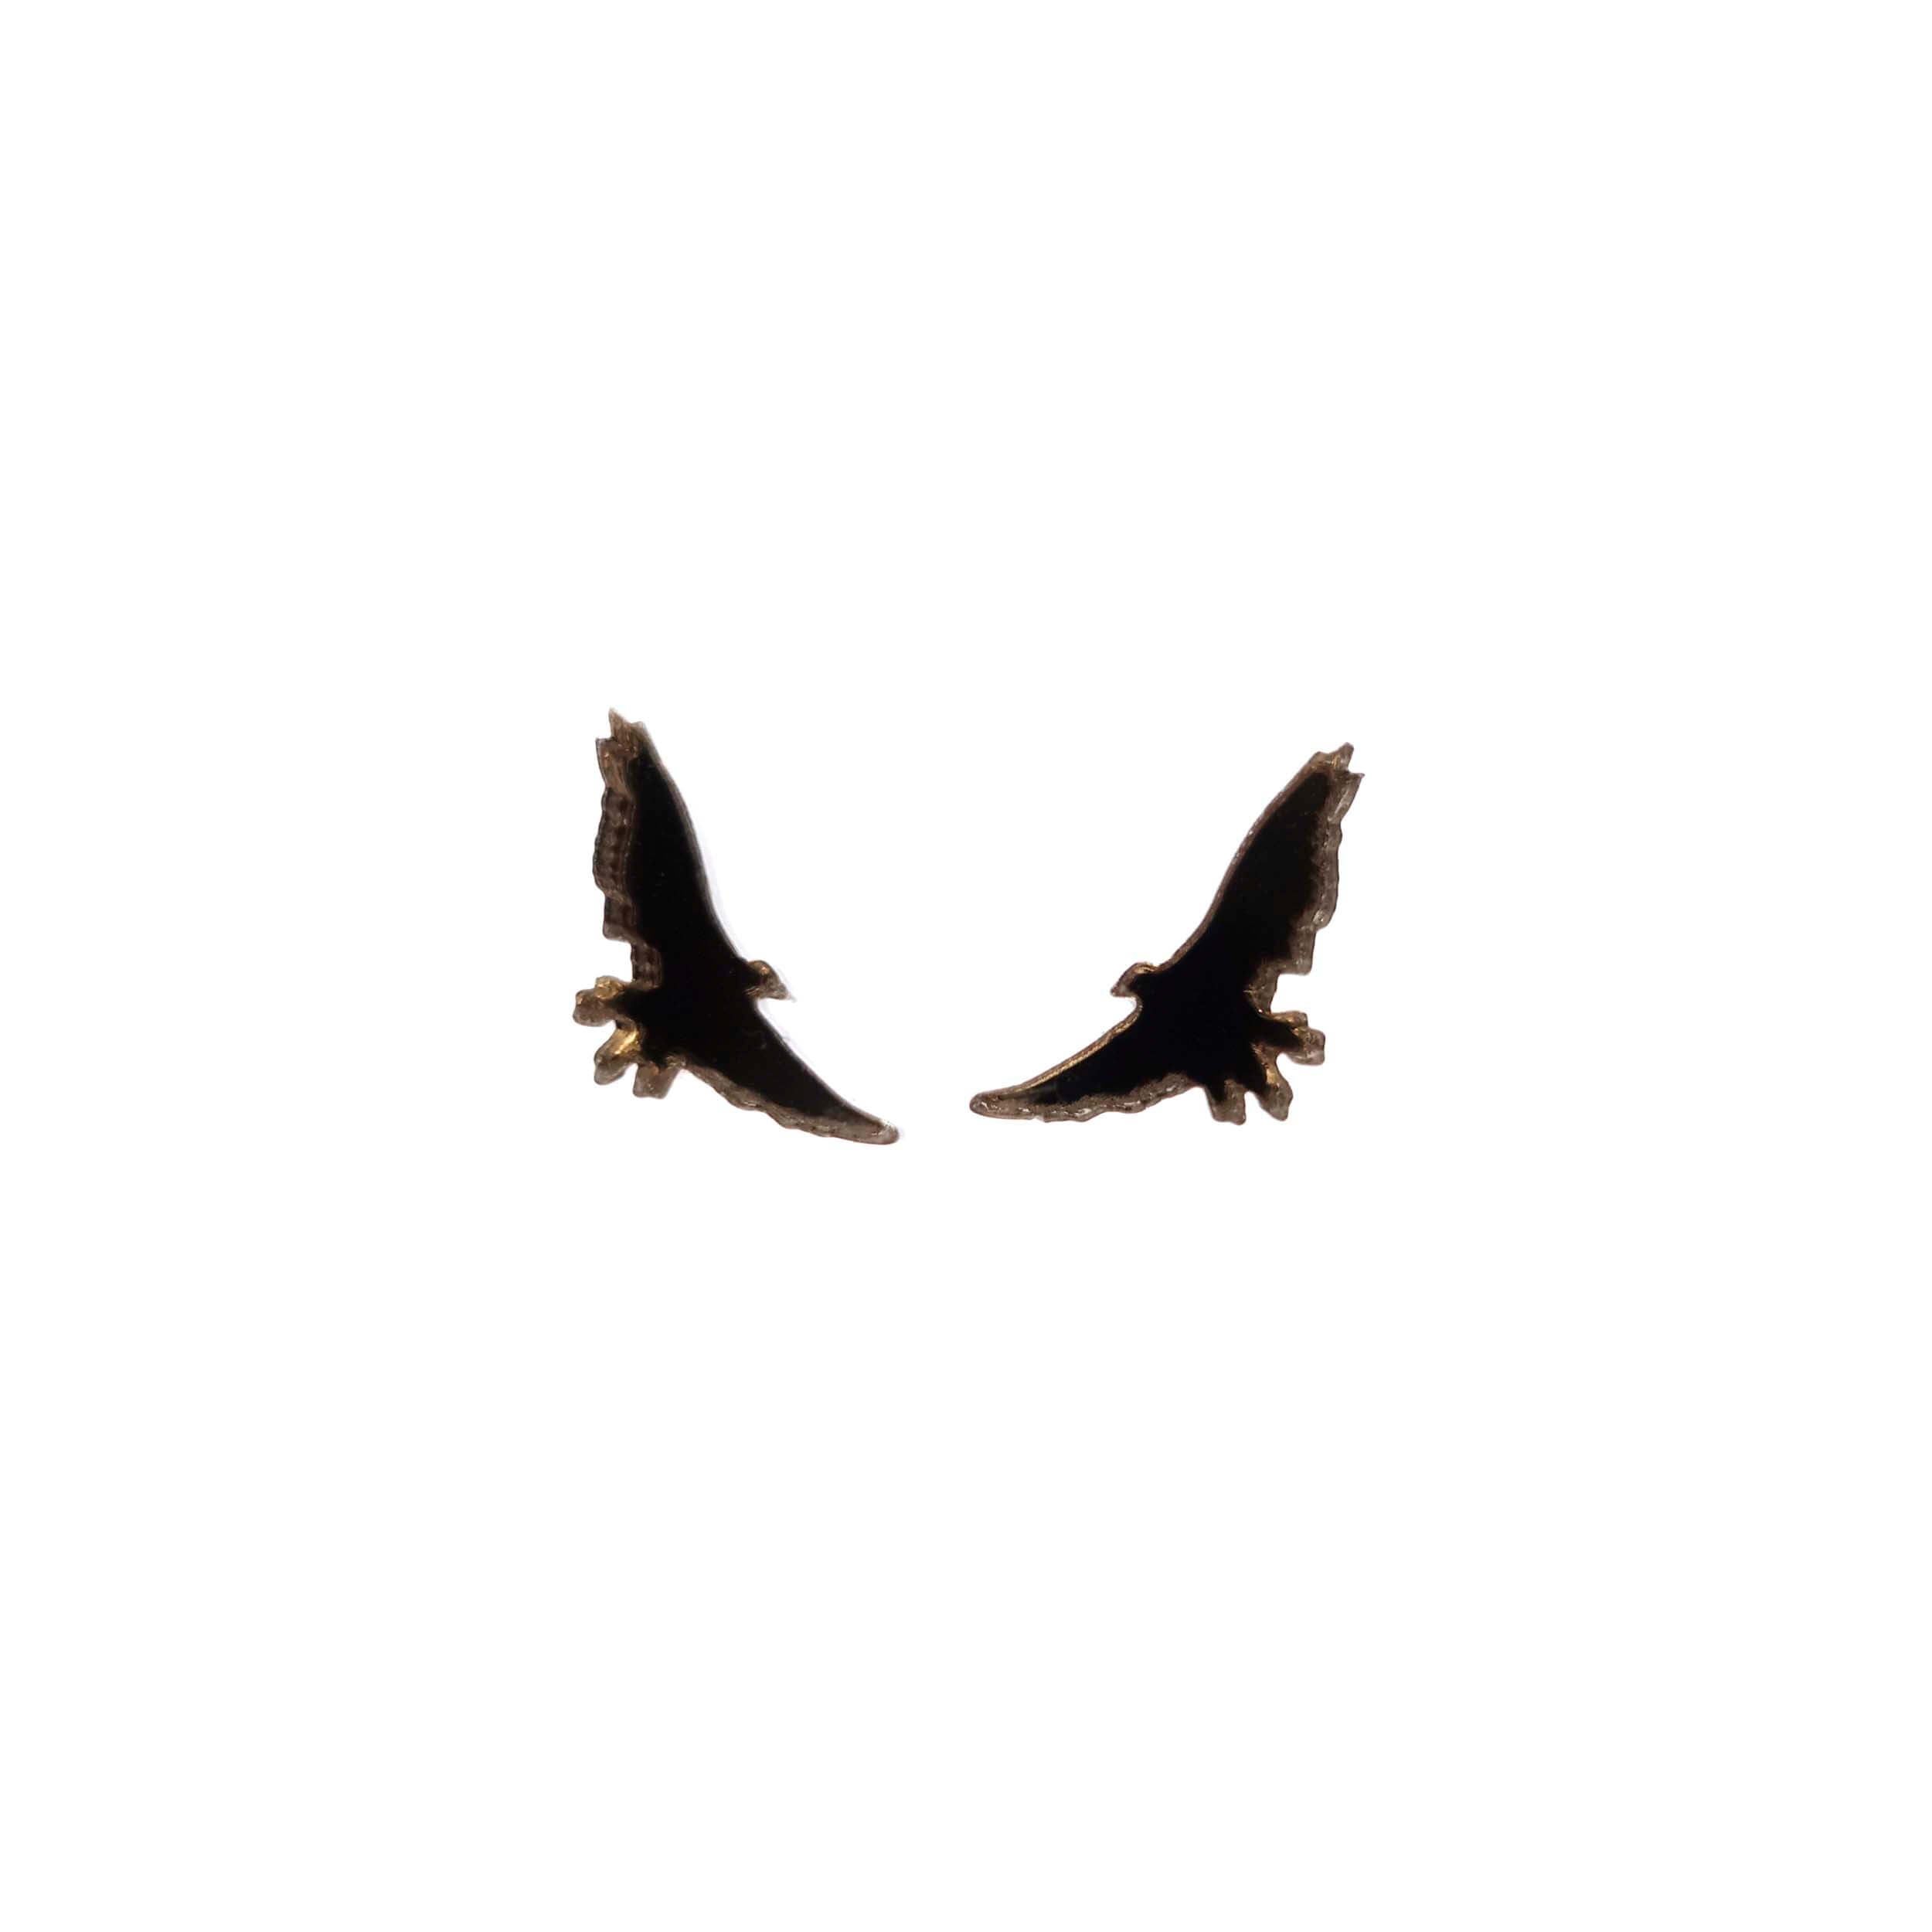 Bronze bird stud earrings from the Brontë Collection, designed by Sarah Day in collaboration with the Brontë Parsonage Museum. 